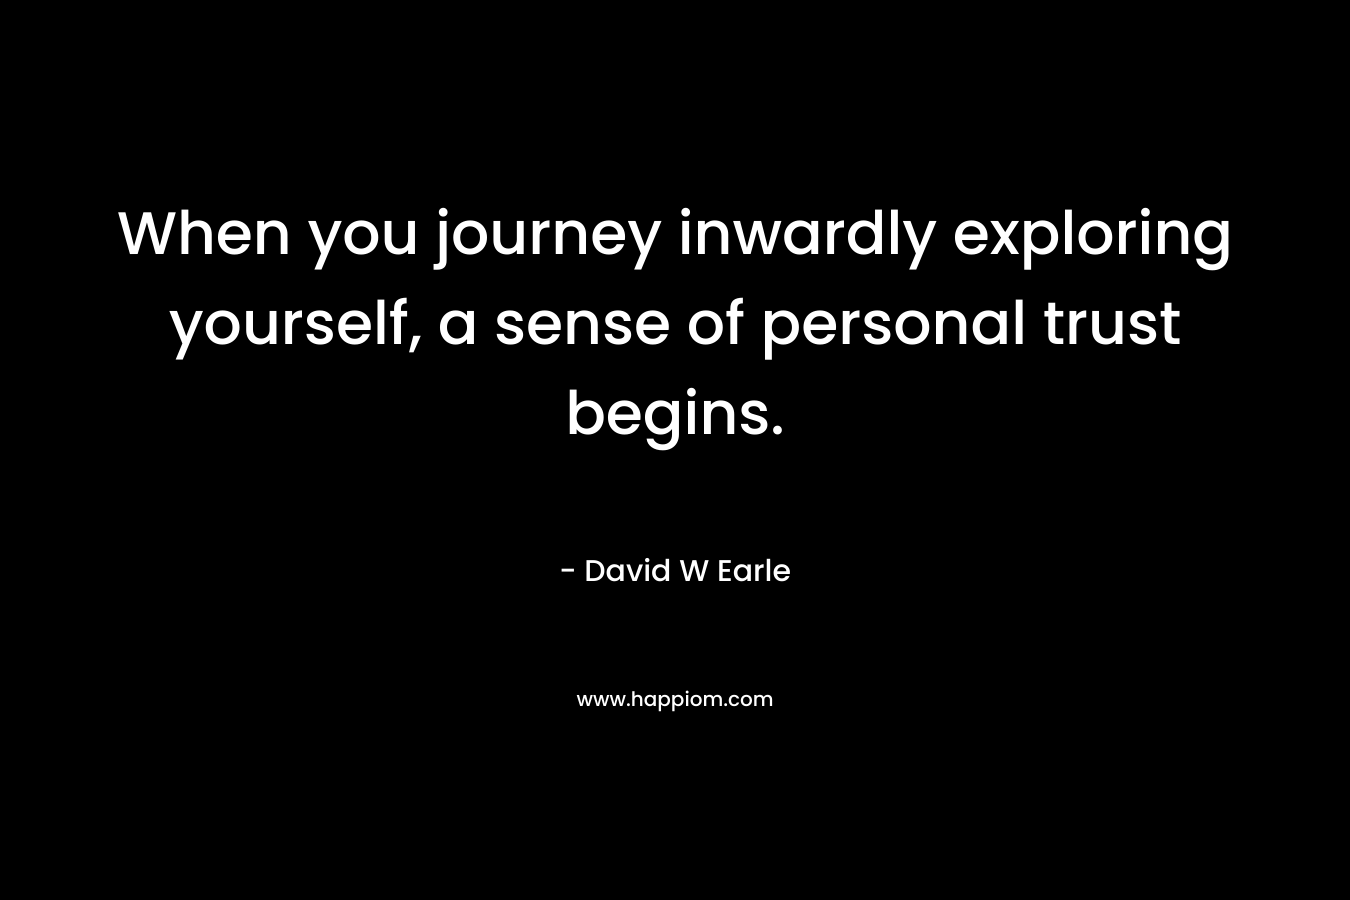 When you journey inwardly exploring yourself, a sense of personal trust begins.